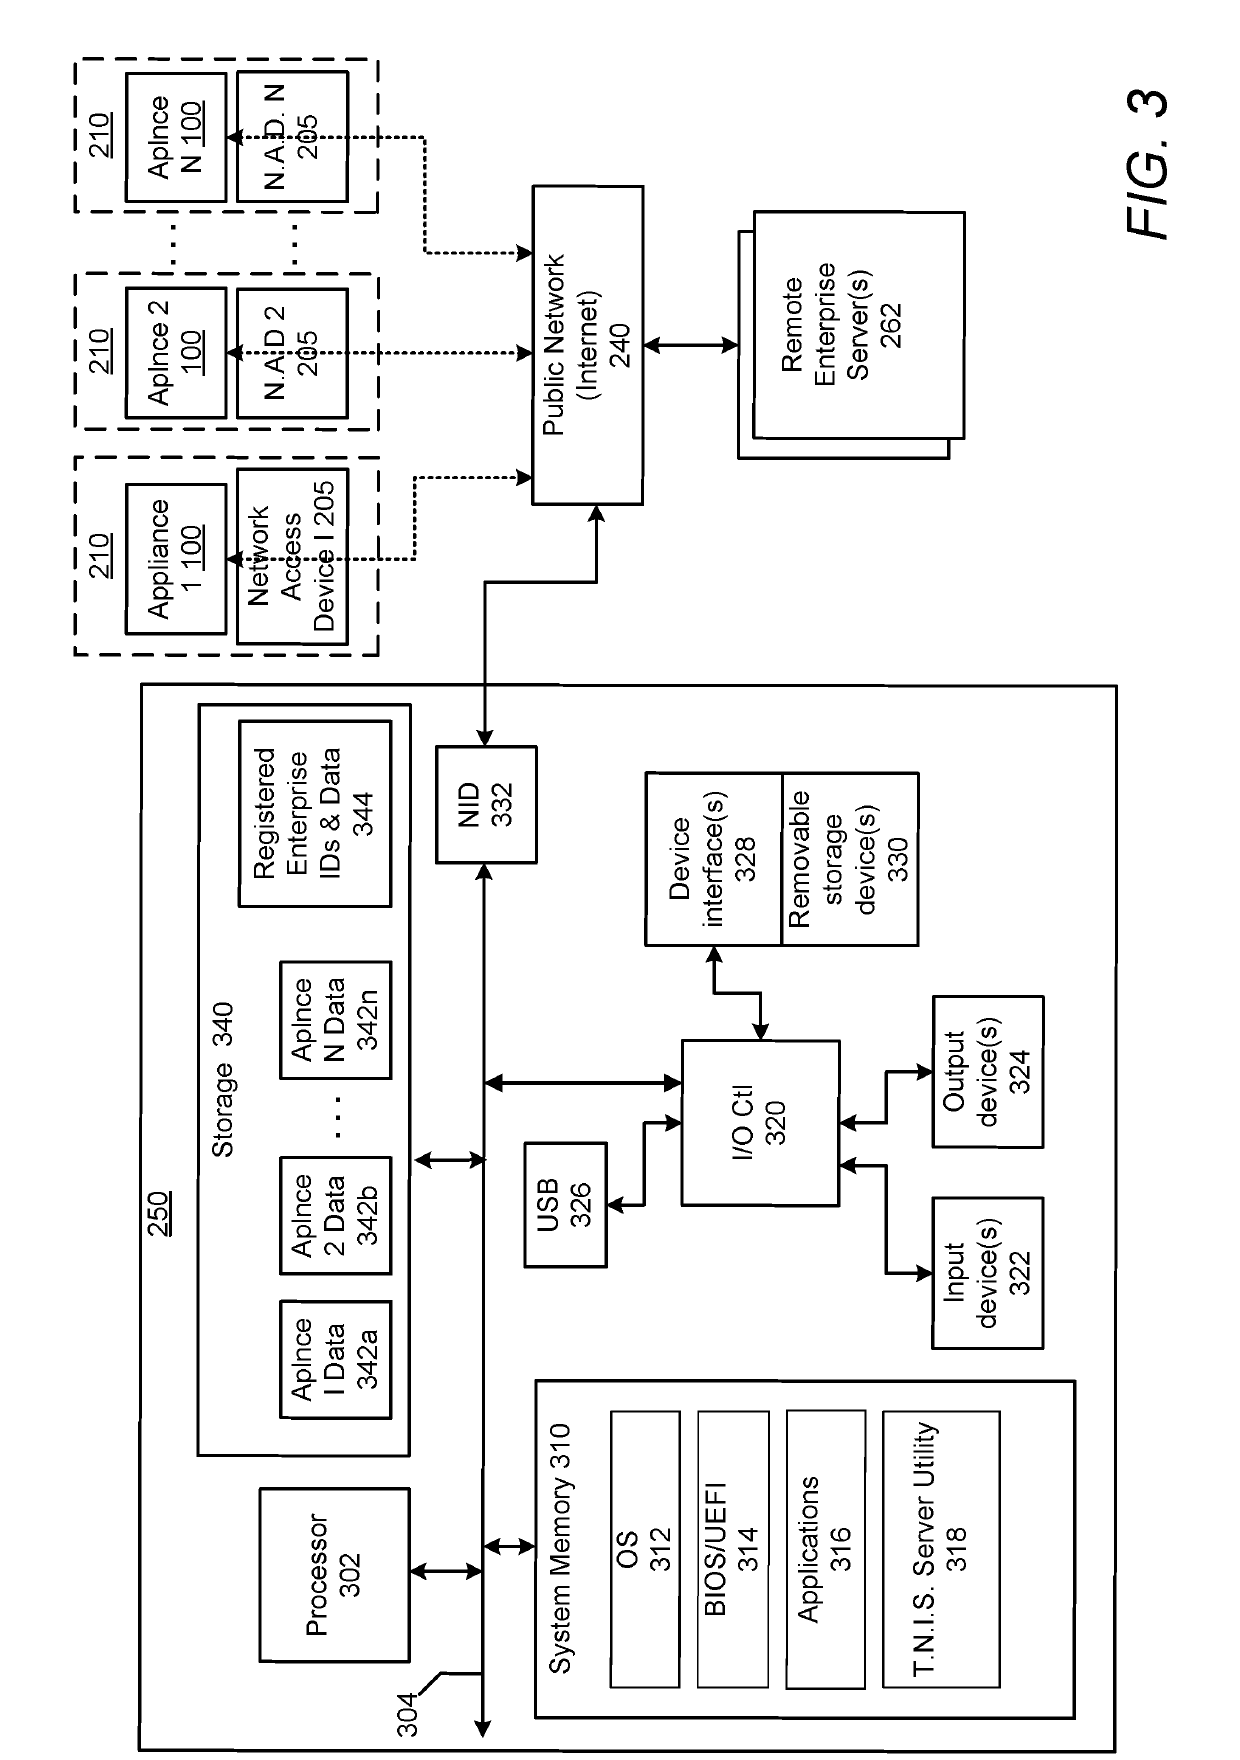 Method and device for robust detection, analytics, and filtering of data/information exchange with connected user devices in a gateway-connected user-space